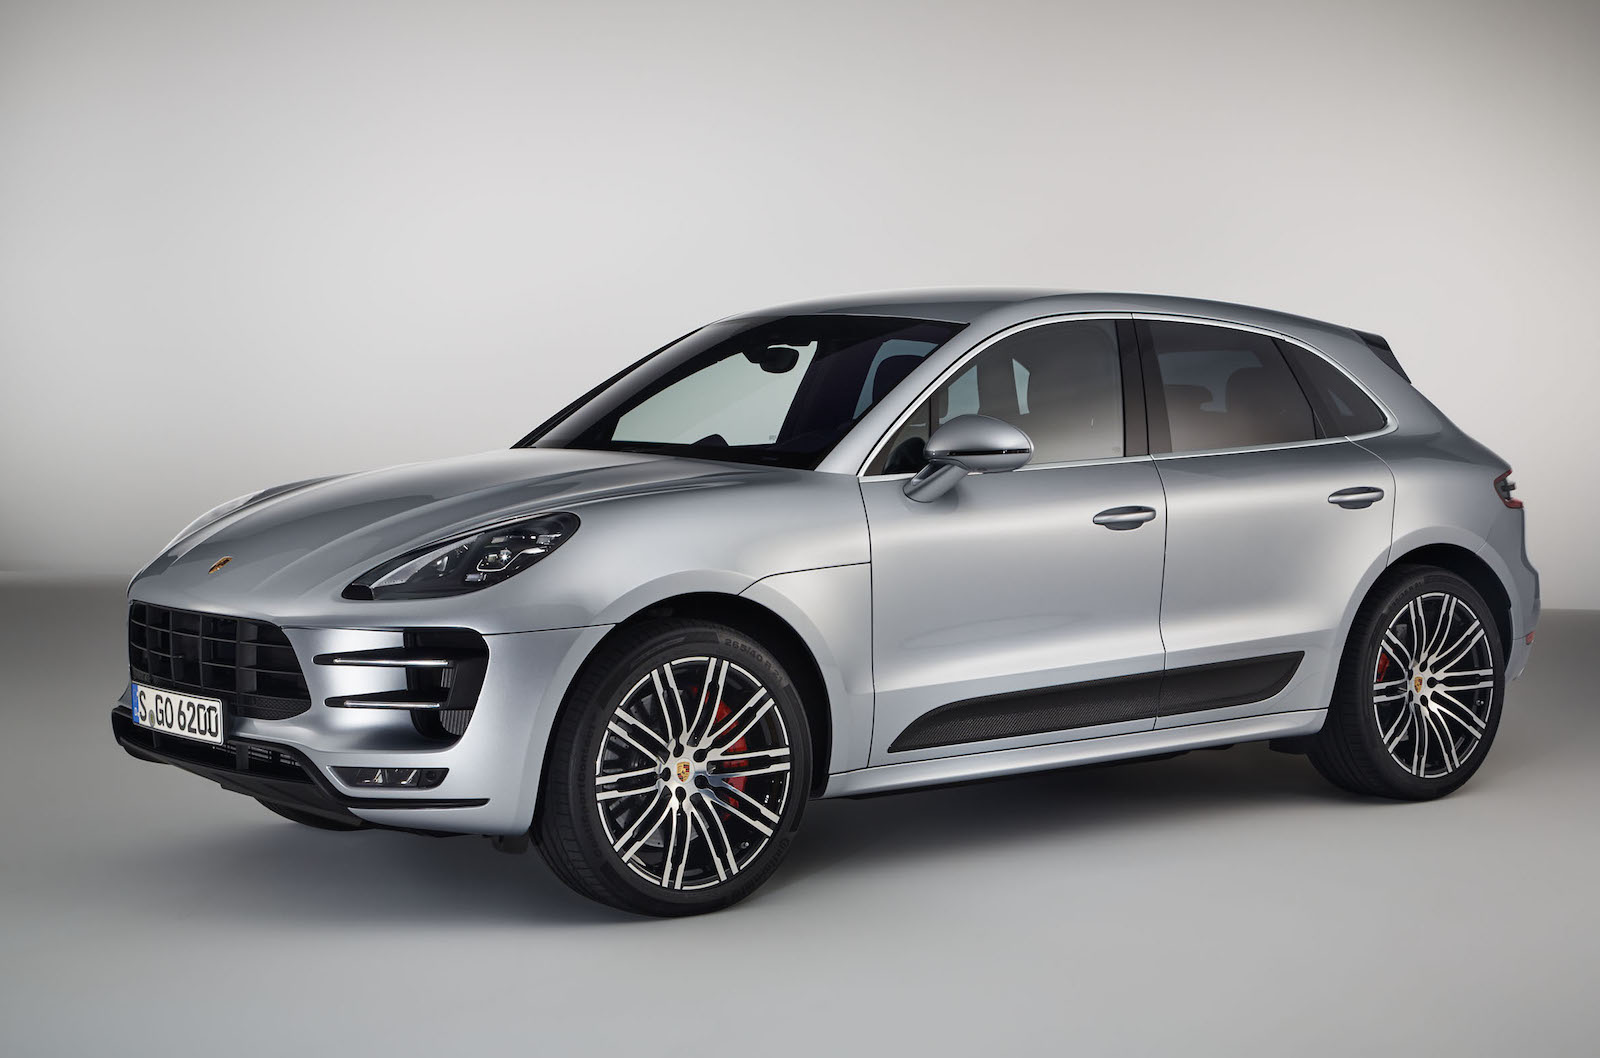 Porsche Macan Performance Pack adds 30kW to Turbo